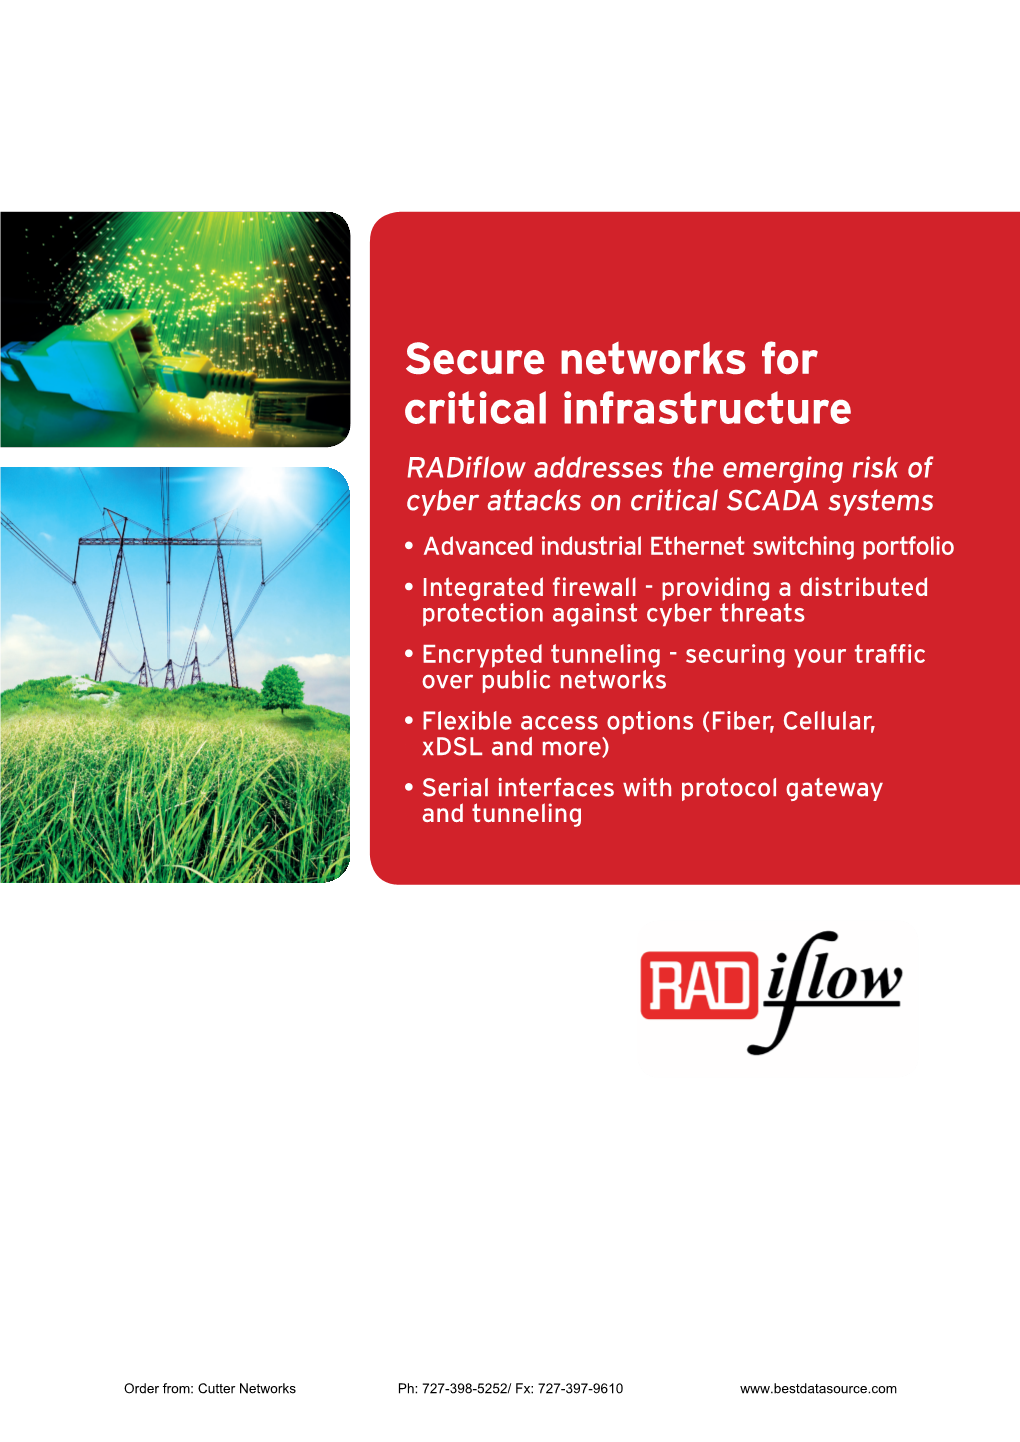 Secure Networks for Critical Infrastructure